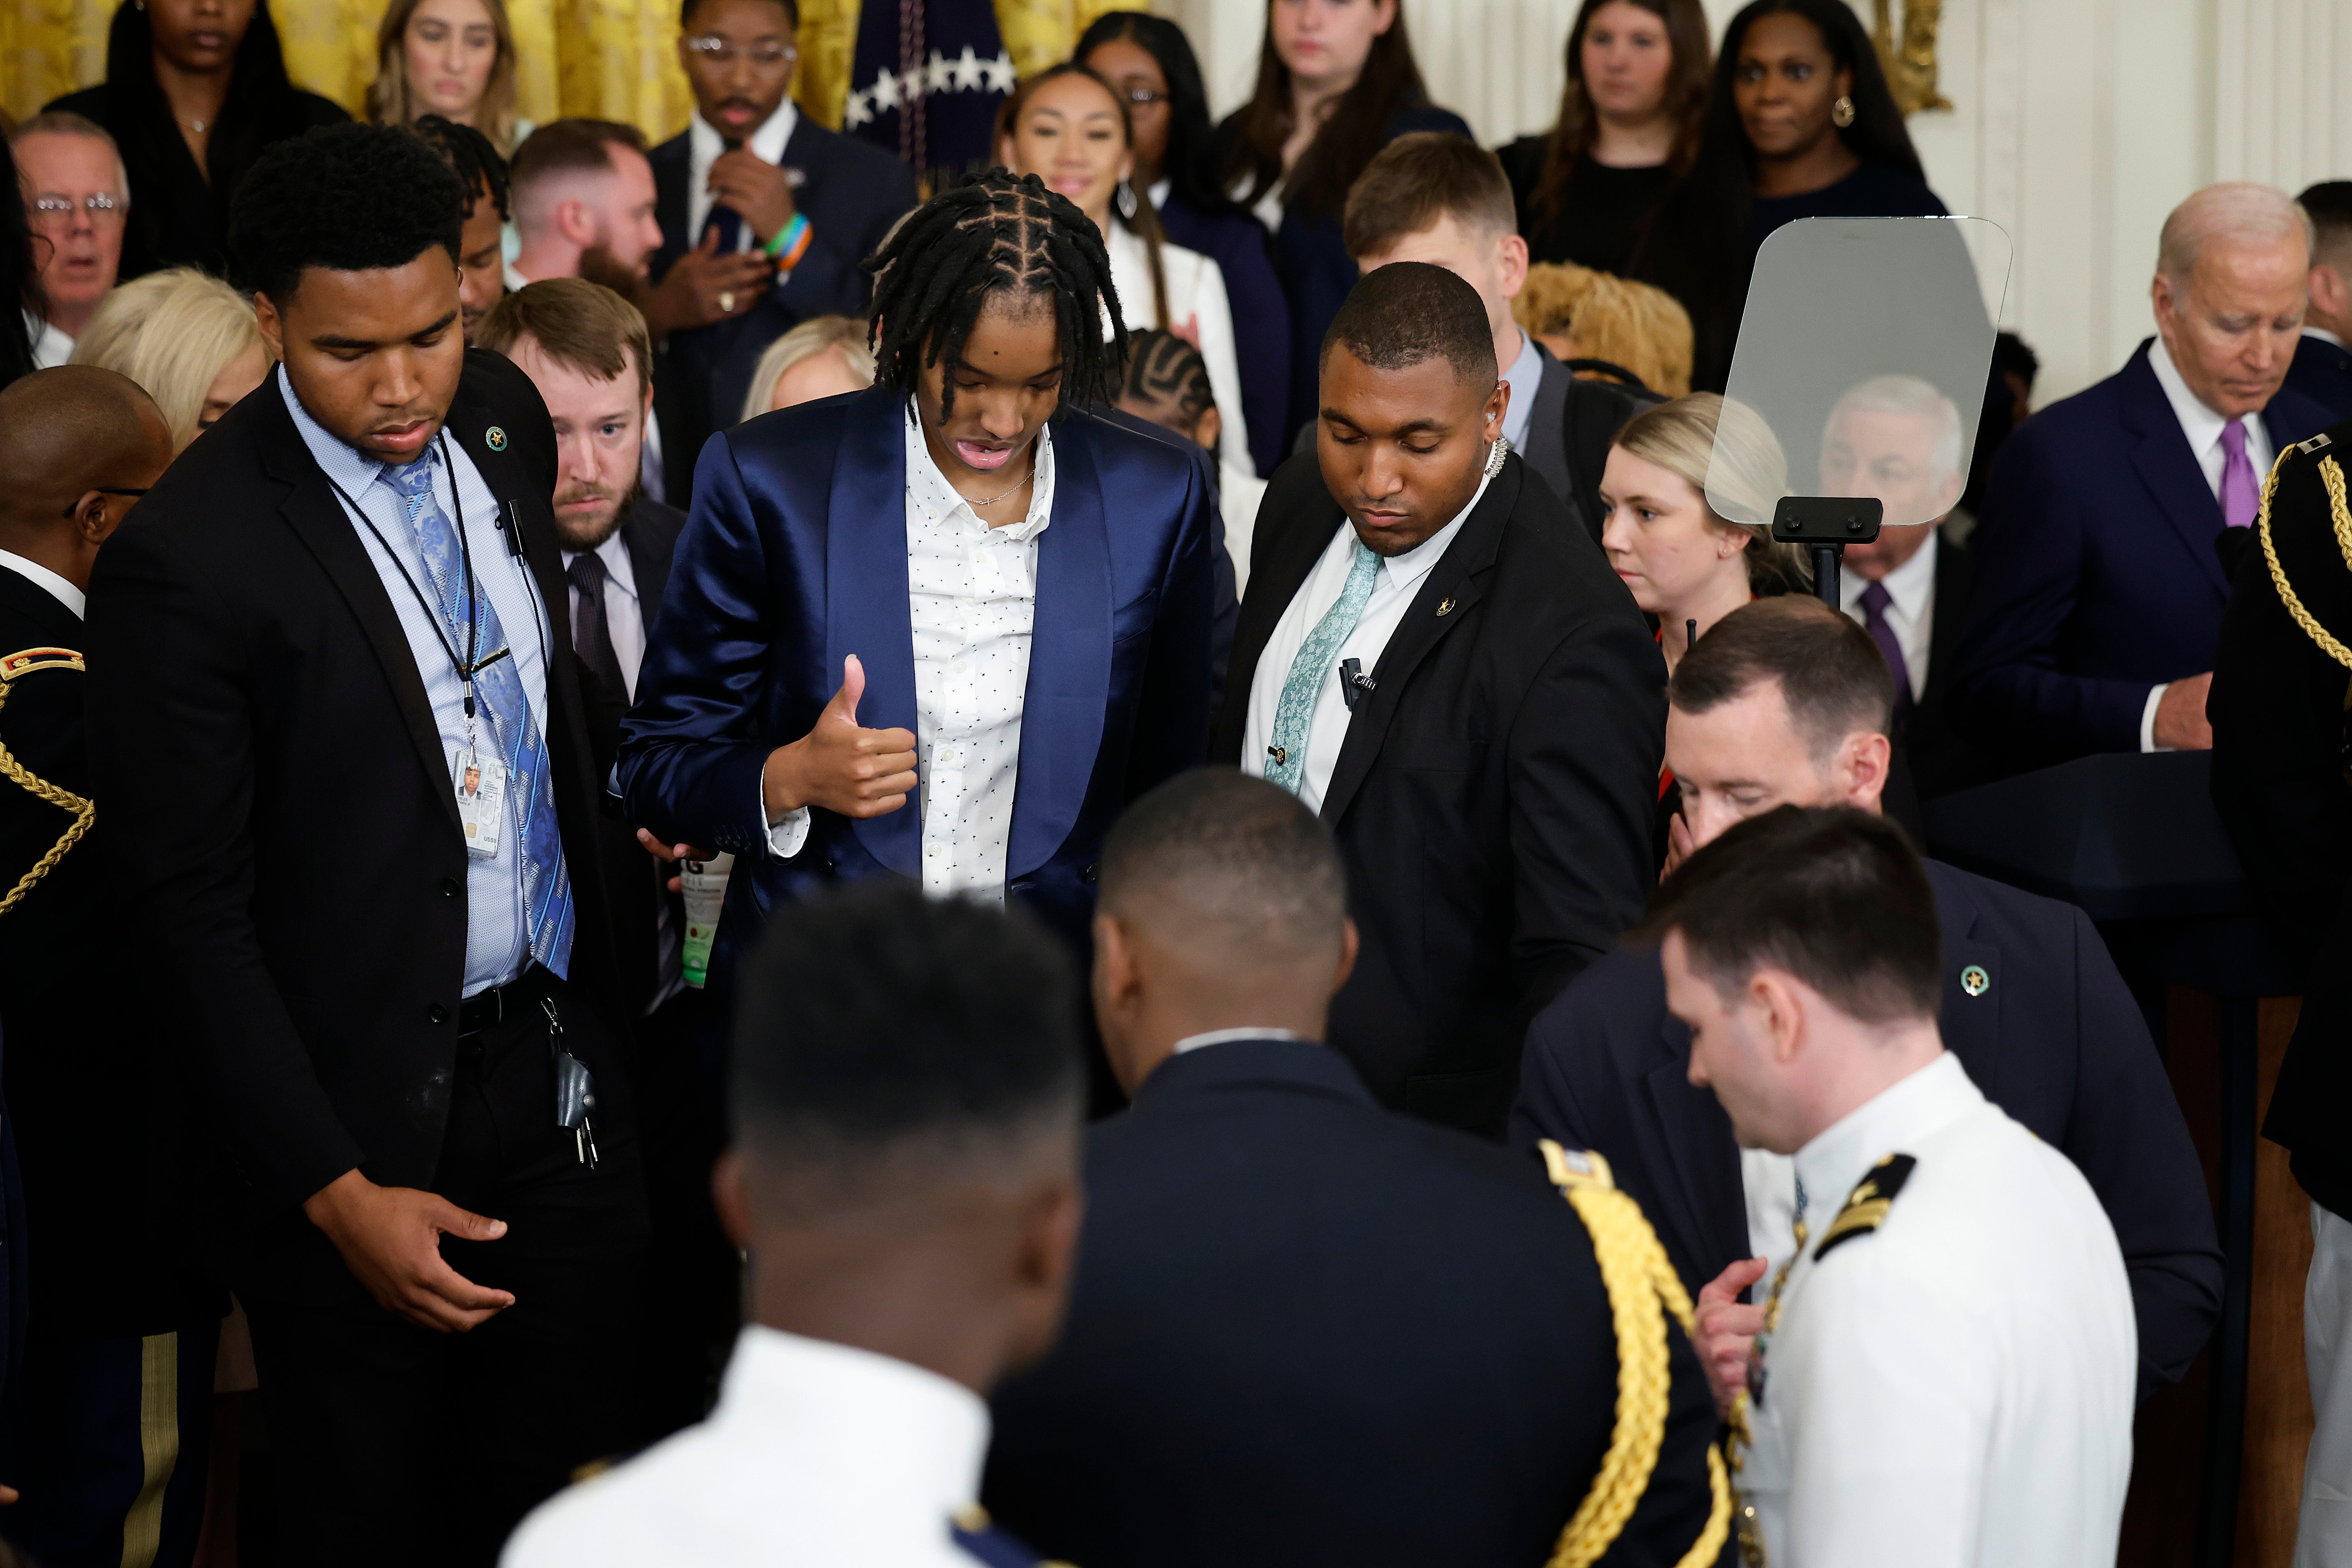 President Biden’s speech paused after the LSU women’s basketball star collapsed during a White House visit